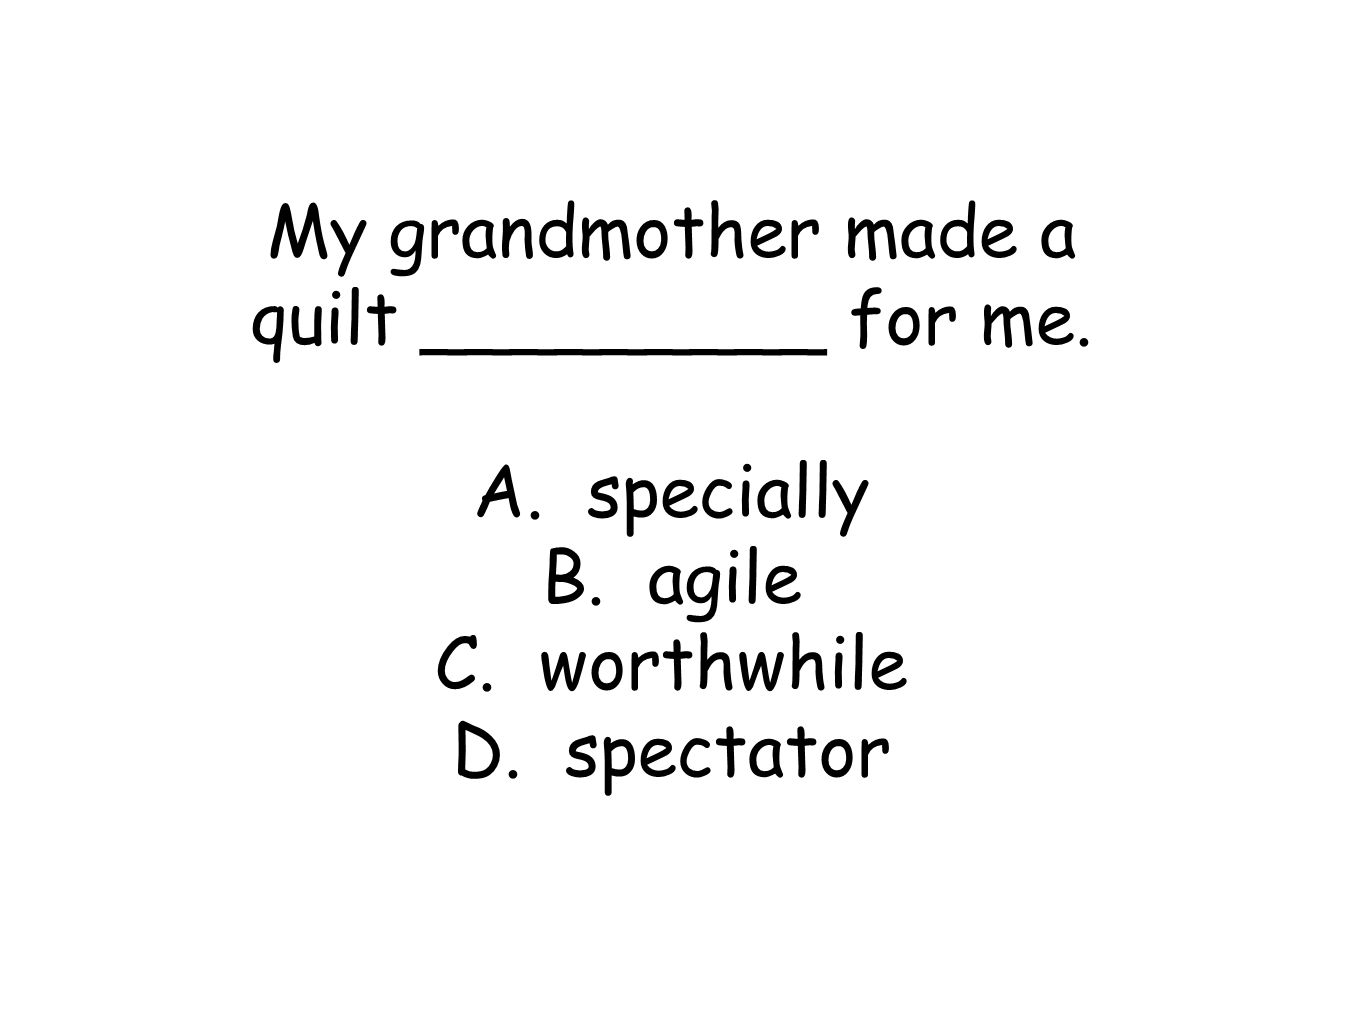 My grandmother made a quilt _________ for me. A. specially B. agile C. worthwhile D. spectator